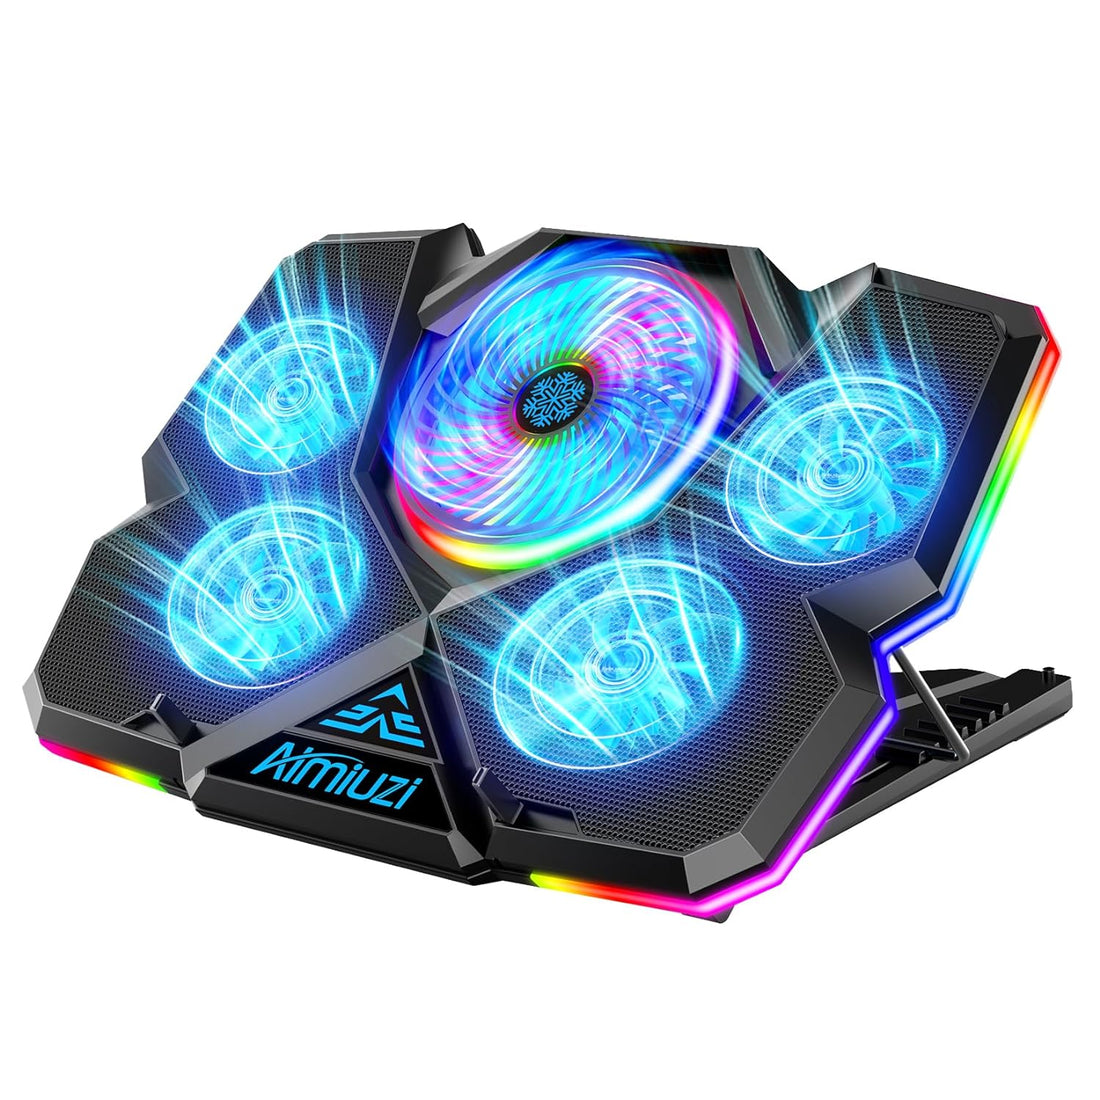 Laptop Cooling Pad, Gaming Laptop Cooler with 5 Quiet Fans and 7 RGB Lights Mode (One-Click Close) , Laptop Fan Cooling Pad Fits 12-17 Inch Laptop, USB Port Powered, 7 Adjustable Height